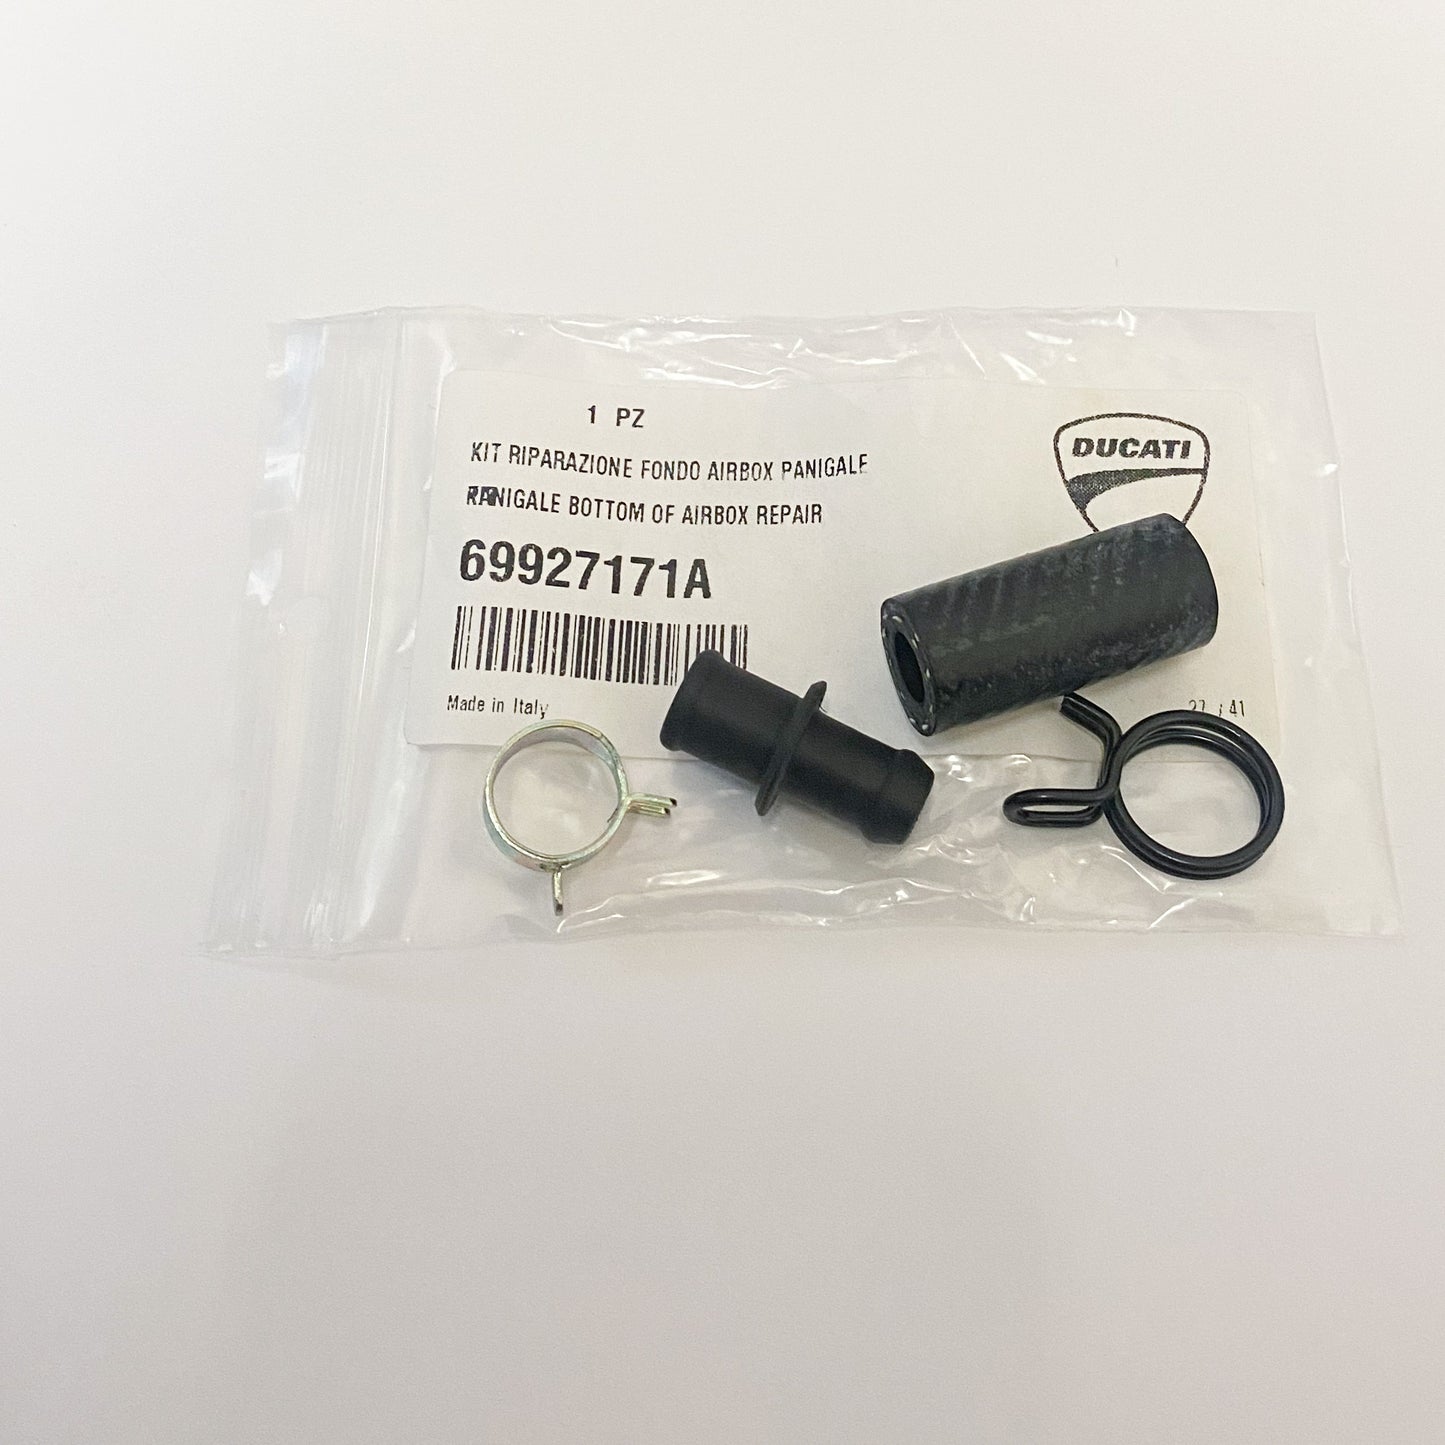 DUCATI PANIGALE BOTTOM OF AIRBOX REPAIR KIT 69927171A